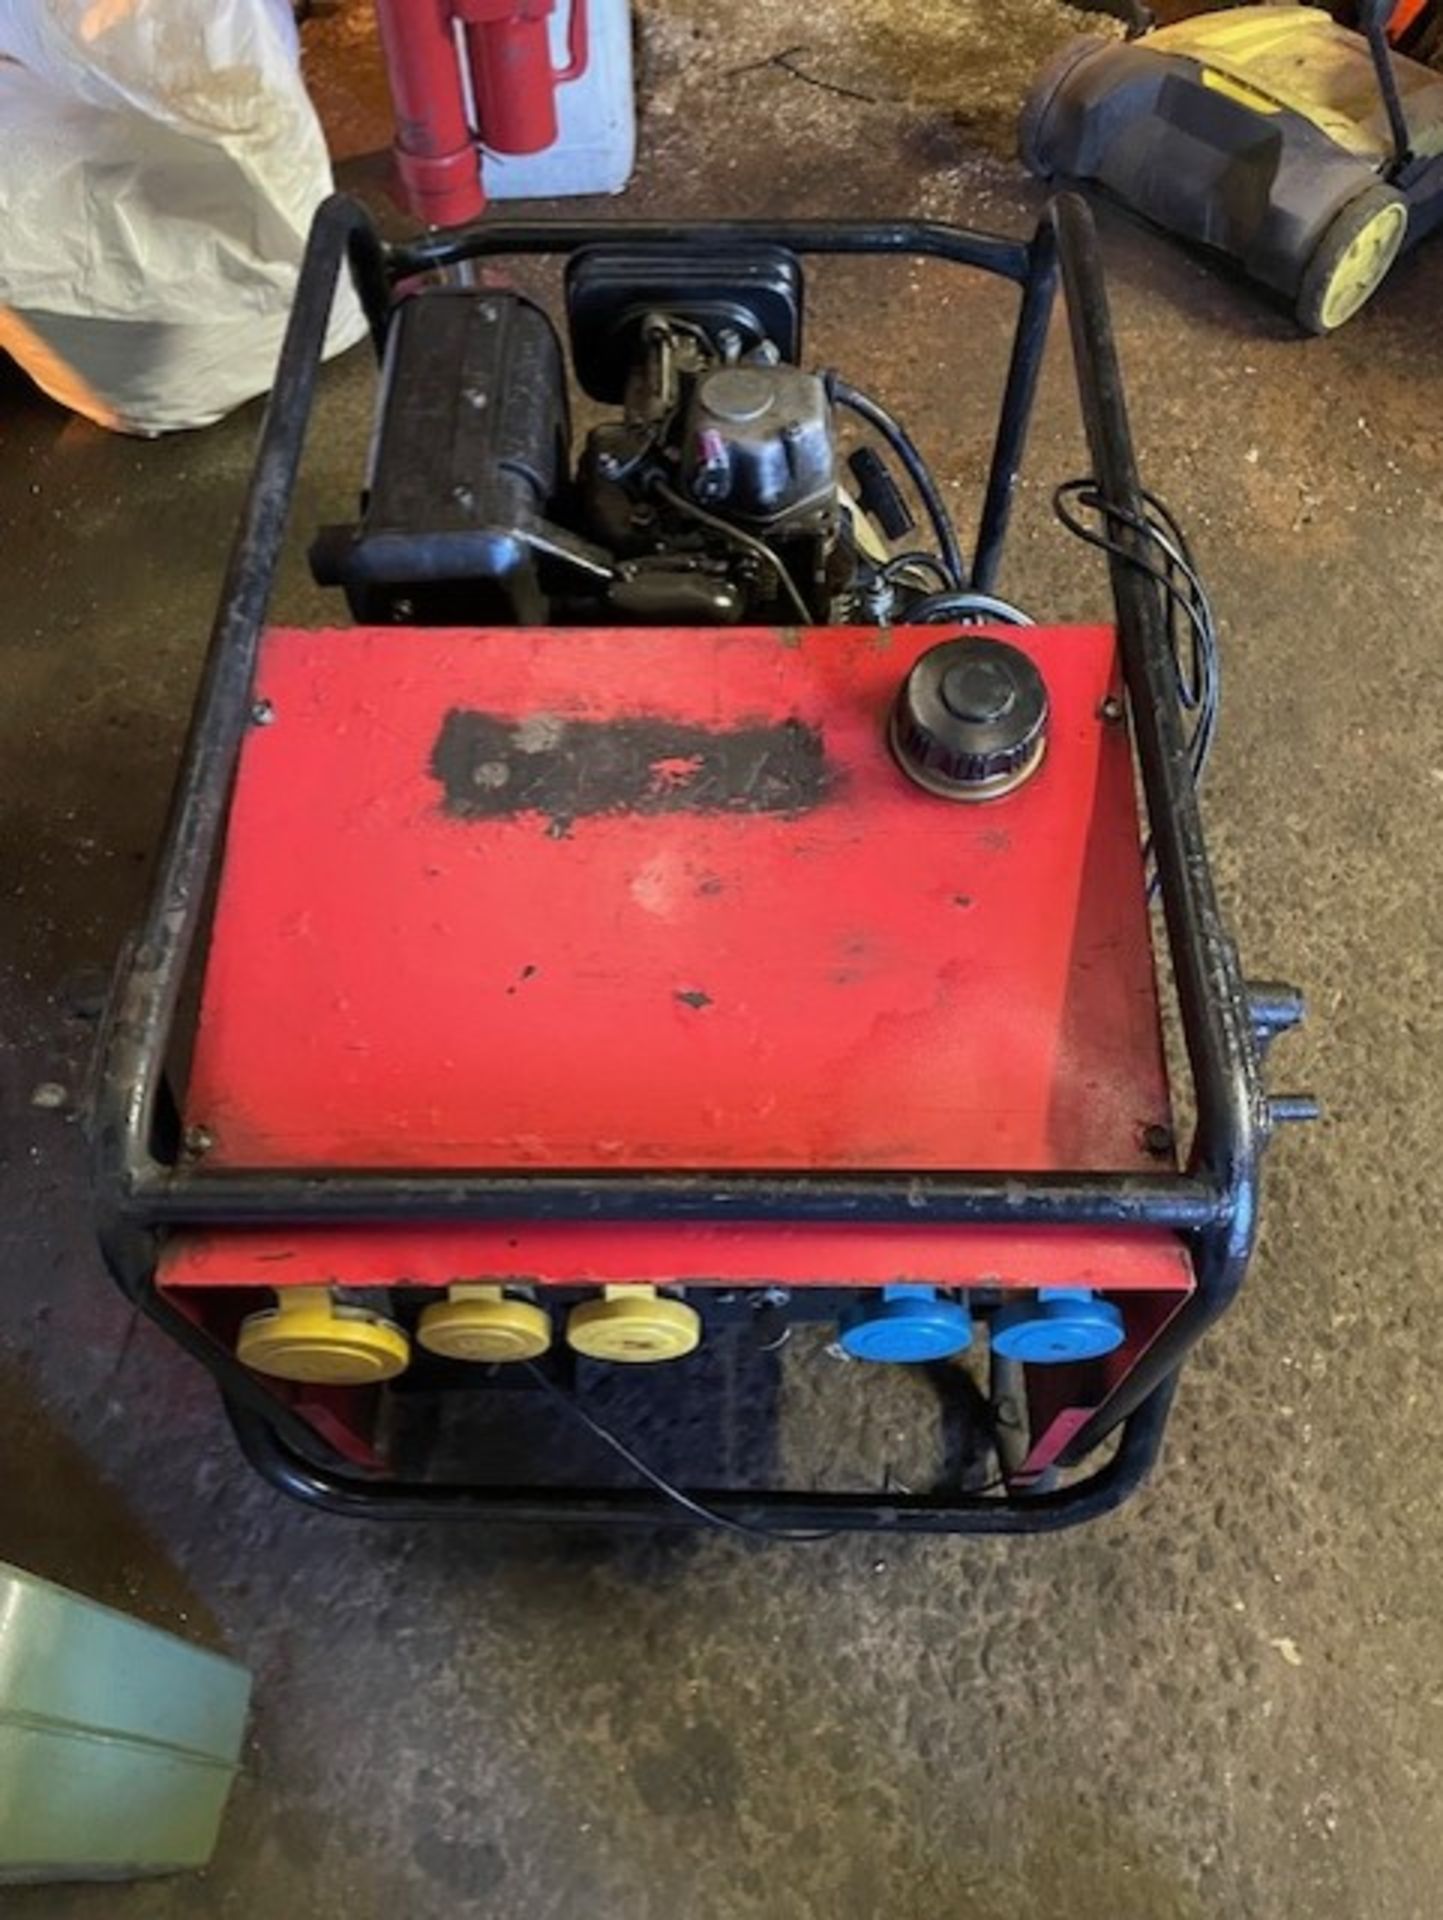 Generator with yanmar engine The engine sounds rough when you turn it over So could be a new